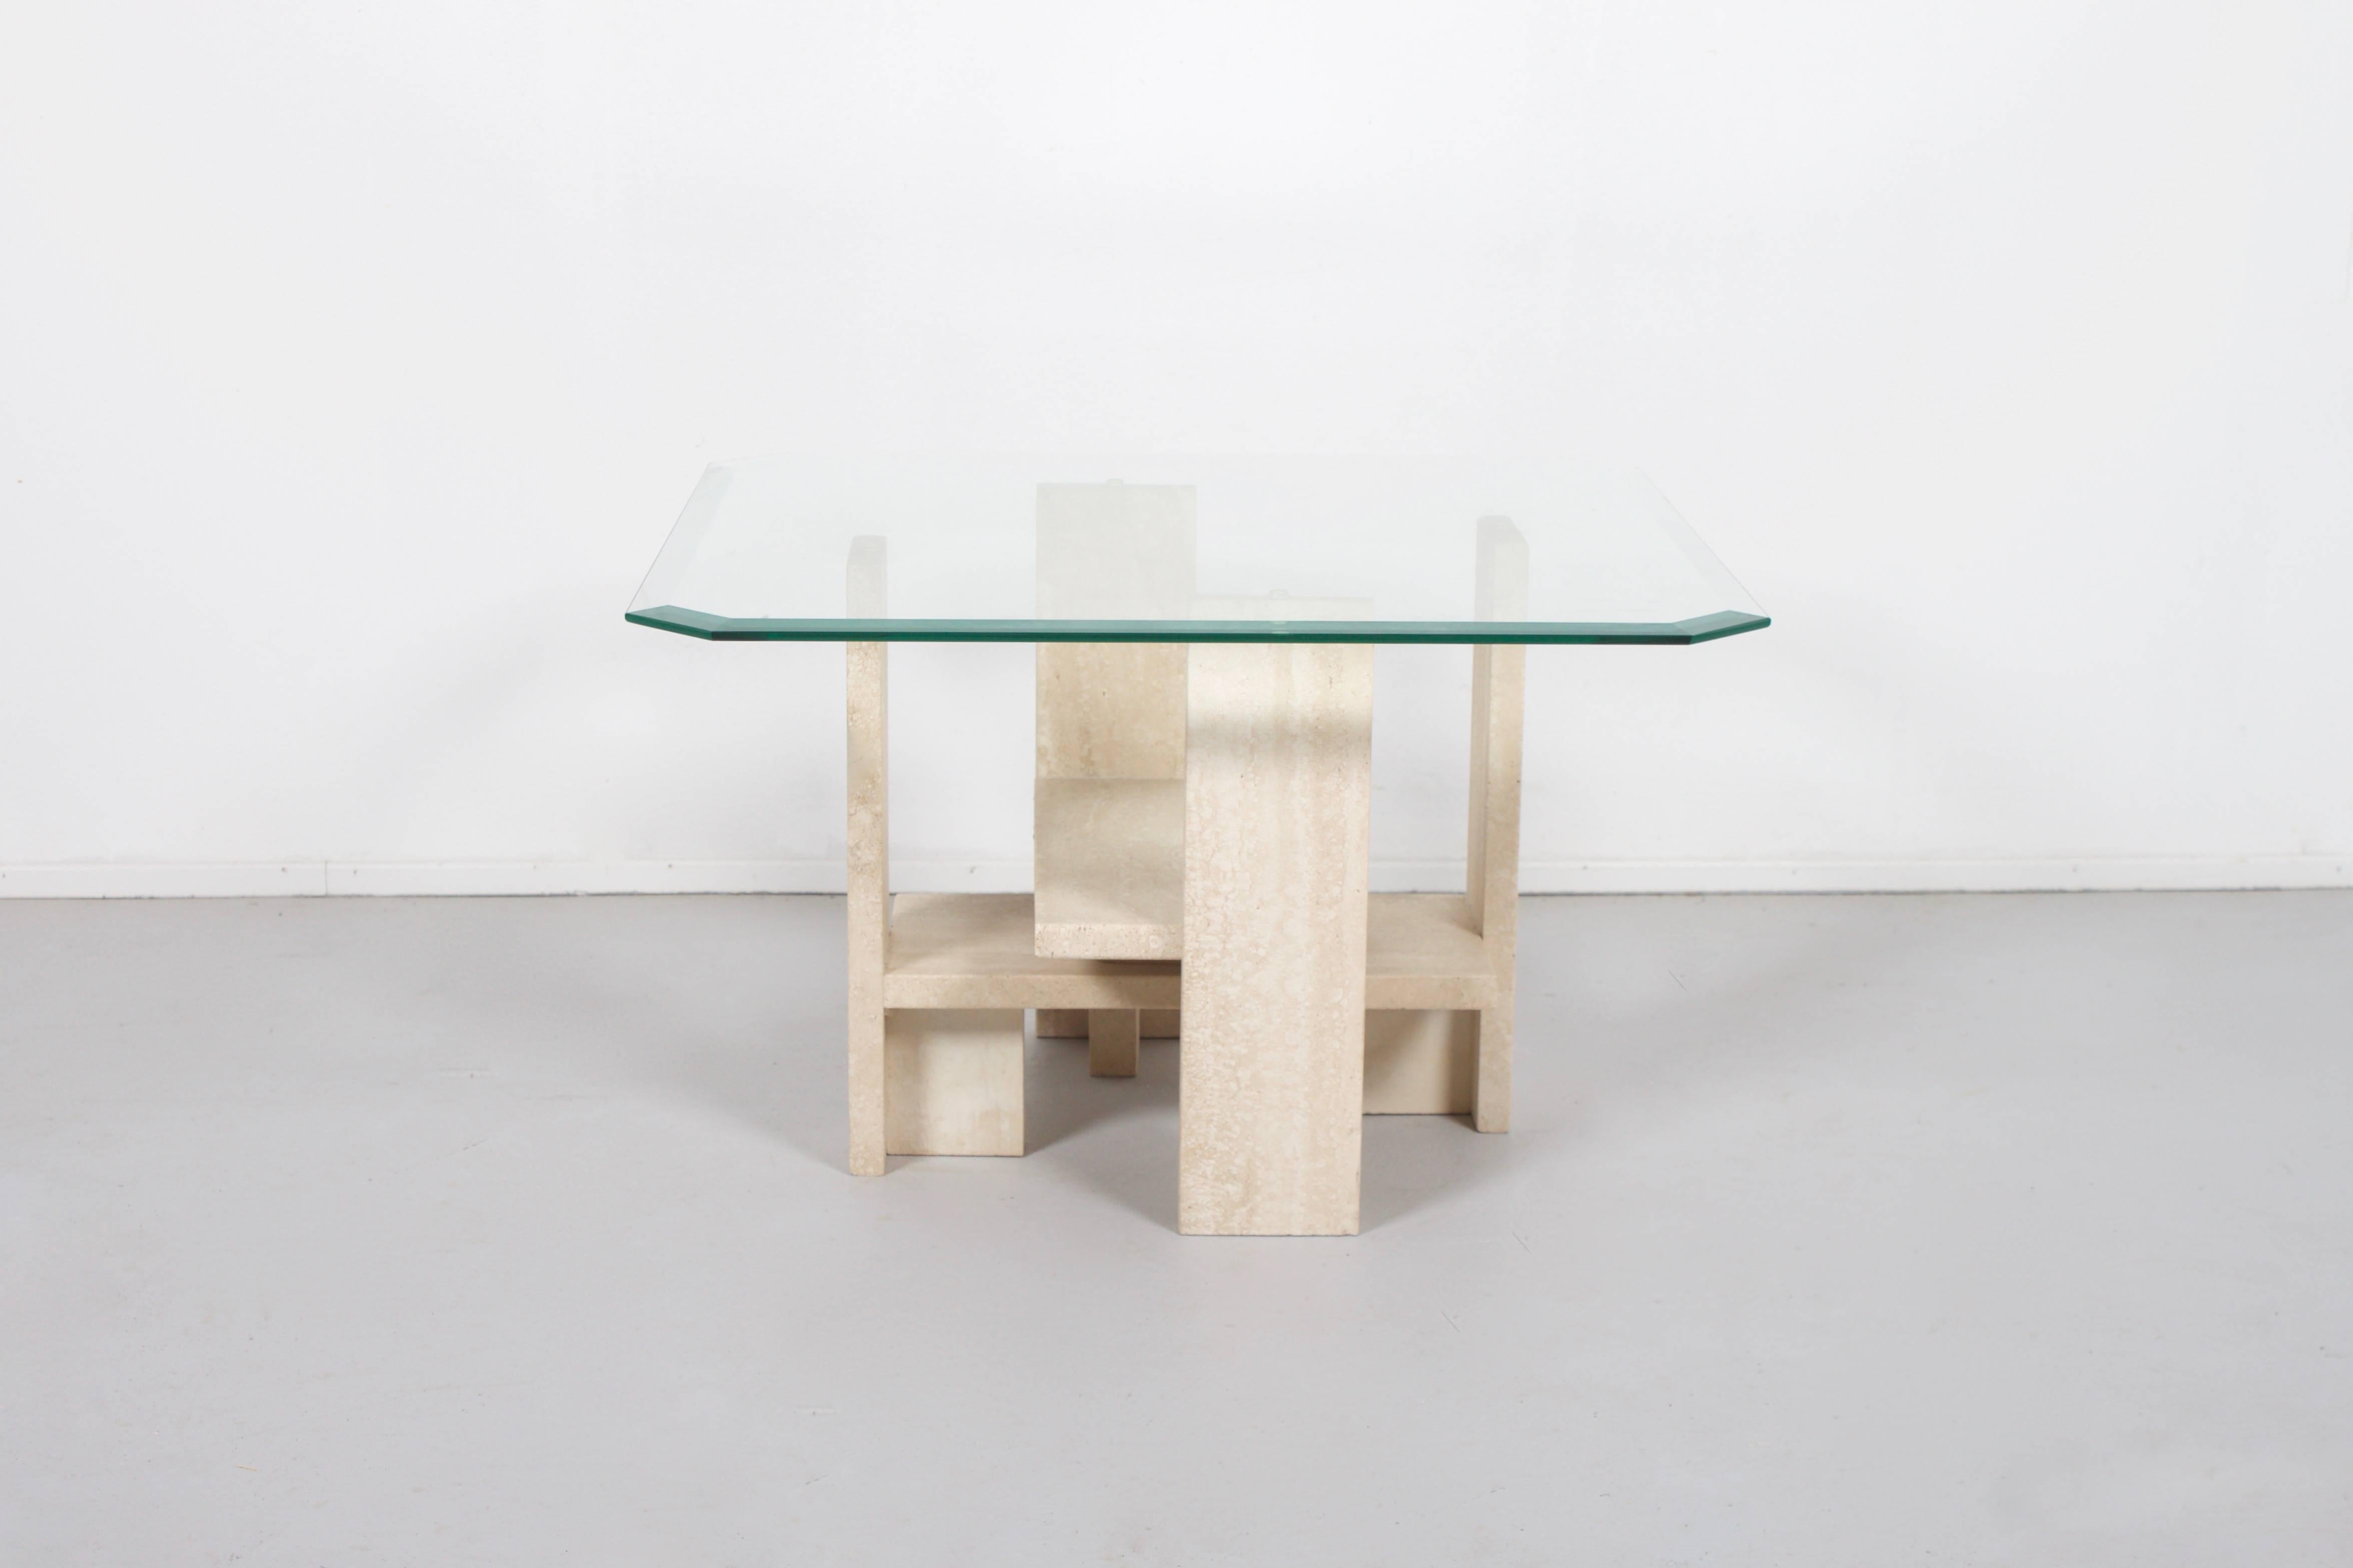 Sculptural end table by Willy Ballez in excellent condition.

Handmade in Belgium in the 1970s.

The abstract base is made from solid travertine.

The top is made of glass. 

We offer a variety of insured shipping services, ask us for the